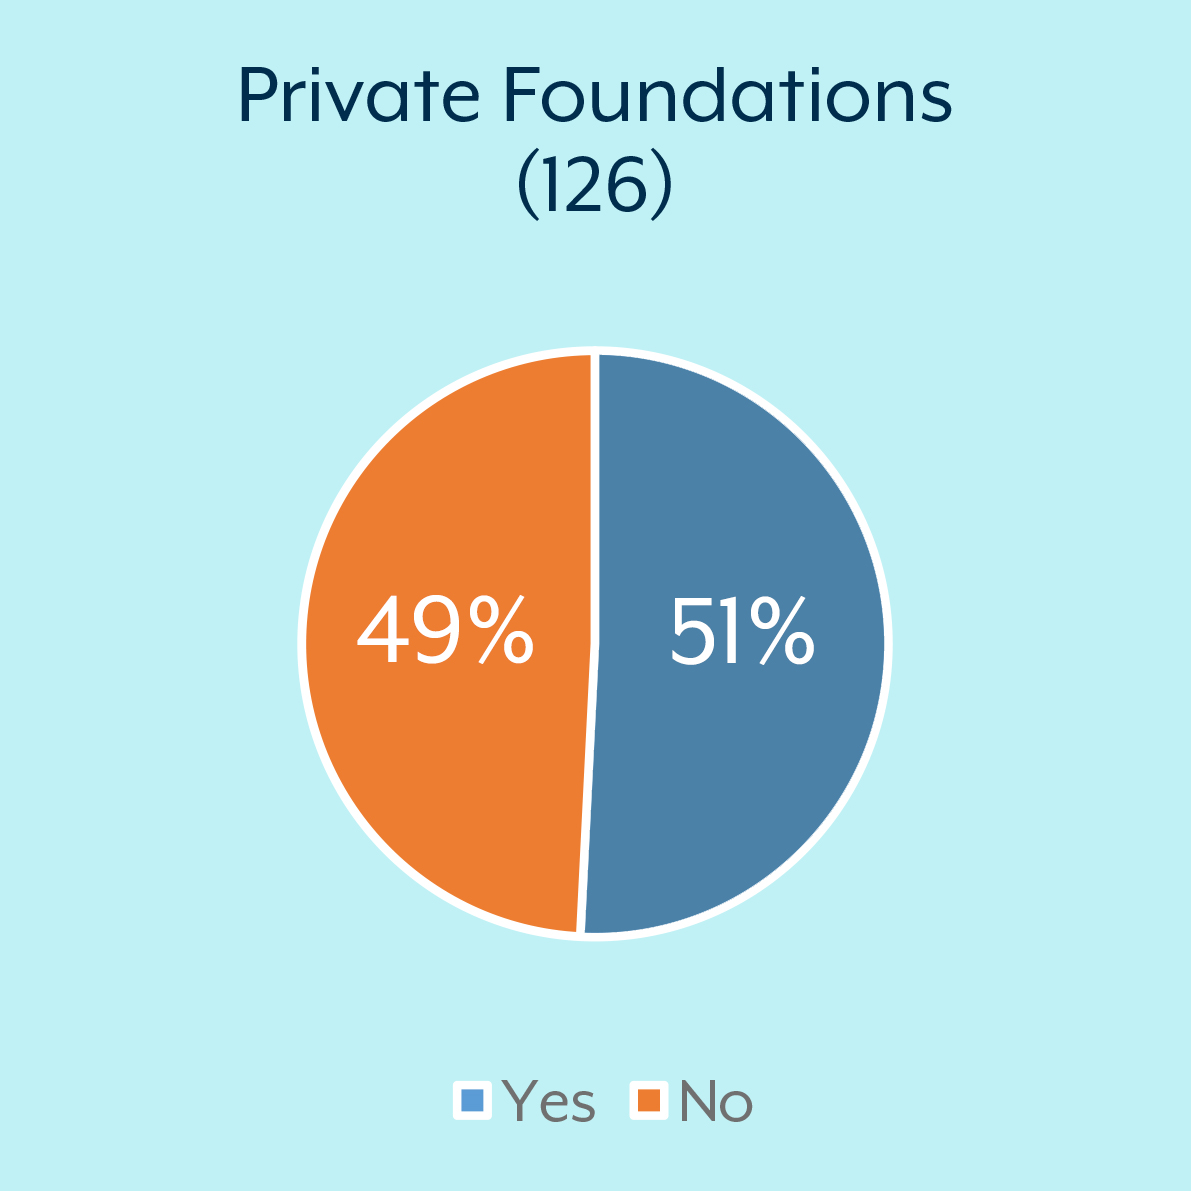 Private Foundations: Yes = 51% No = 49%